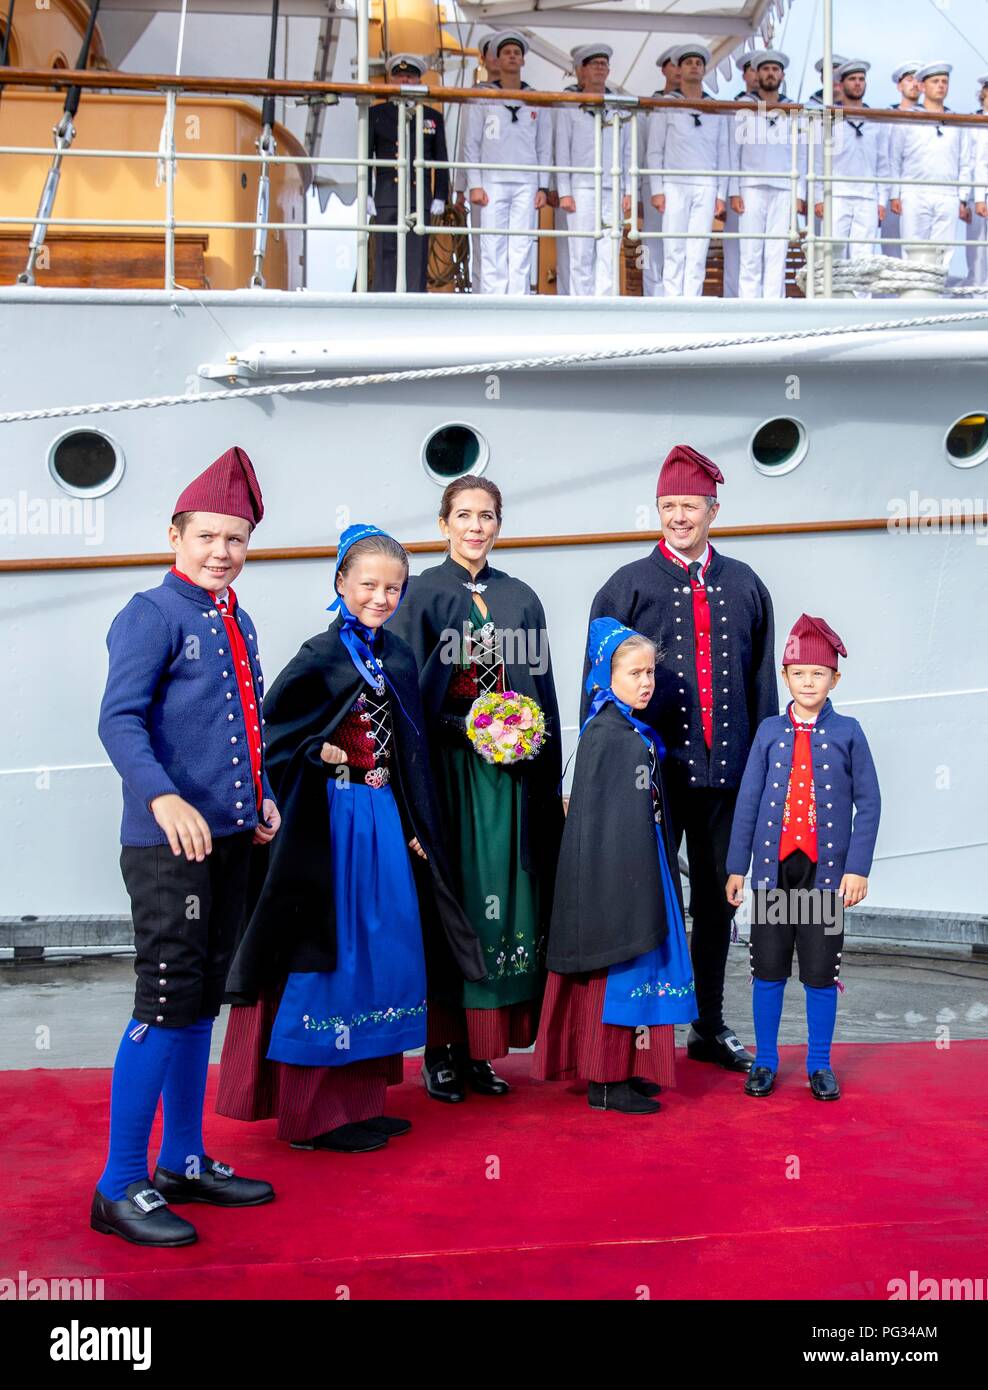 Torshavn, Faroe Islands, Denmark. 23rd Aug, 2018. Crown Prince Frederik, Crown Princess Mary, Prince Christian, Princess Isabella, Prince Vincent and Princess Josehpine of Denmark arrive with the The Royal Ship, HDMY Dannebrog at Bursatangi, on August 23, 2018, on the 1st of the 4 days visit to the Faroe Islands Photo : Albert Nieboer/ Netherlands OUT/Point de Vue OUT | Credit: dpa/Alamy Live News Stock Photo